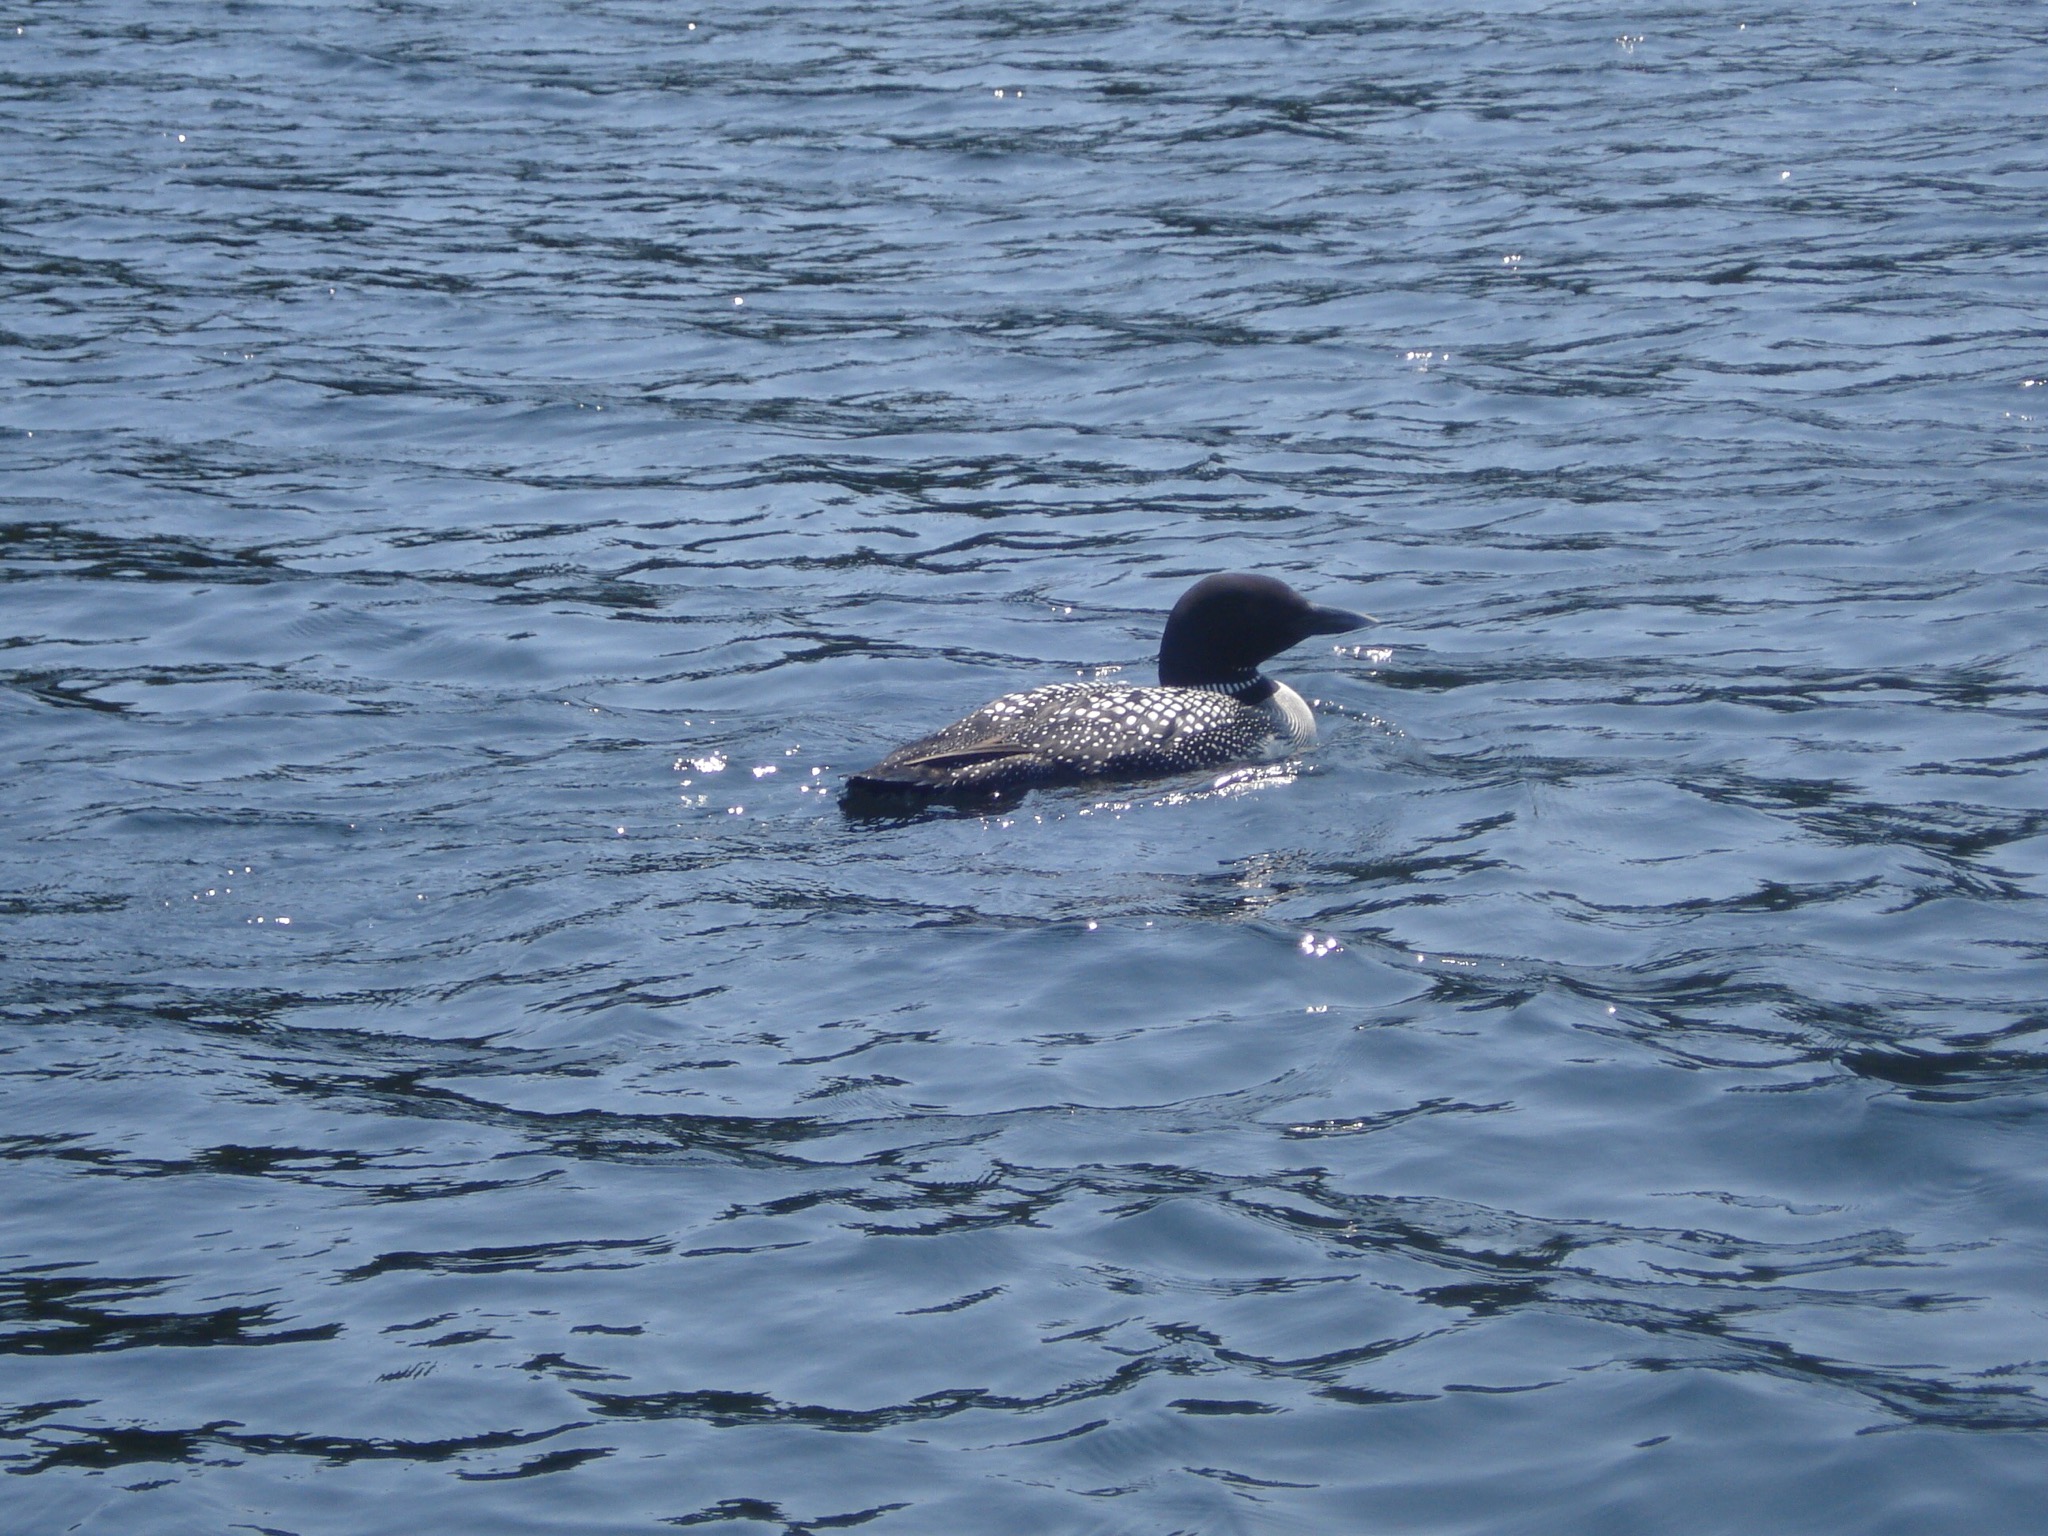 A Maine loon in Crescent Lake, in the Sebago Lakes region of Southern Maine.